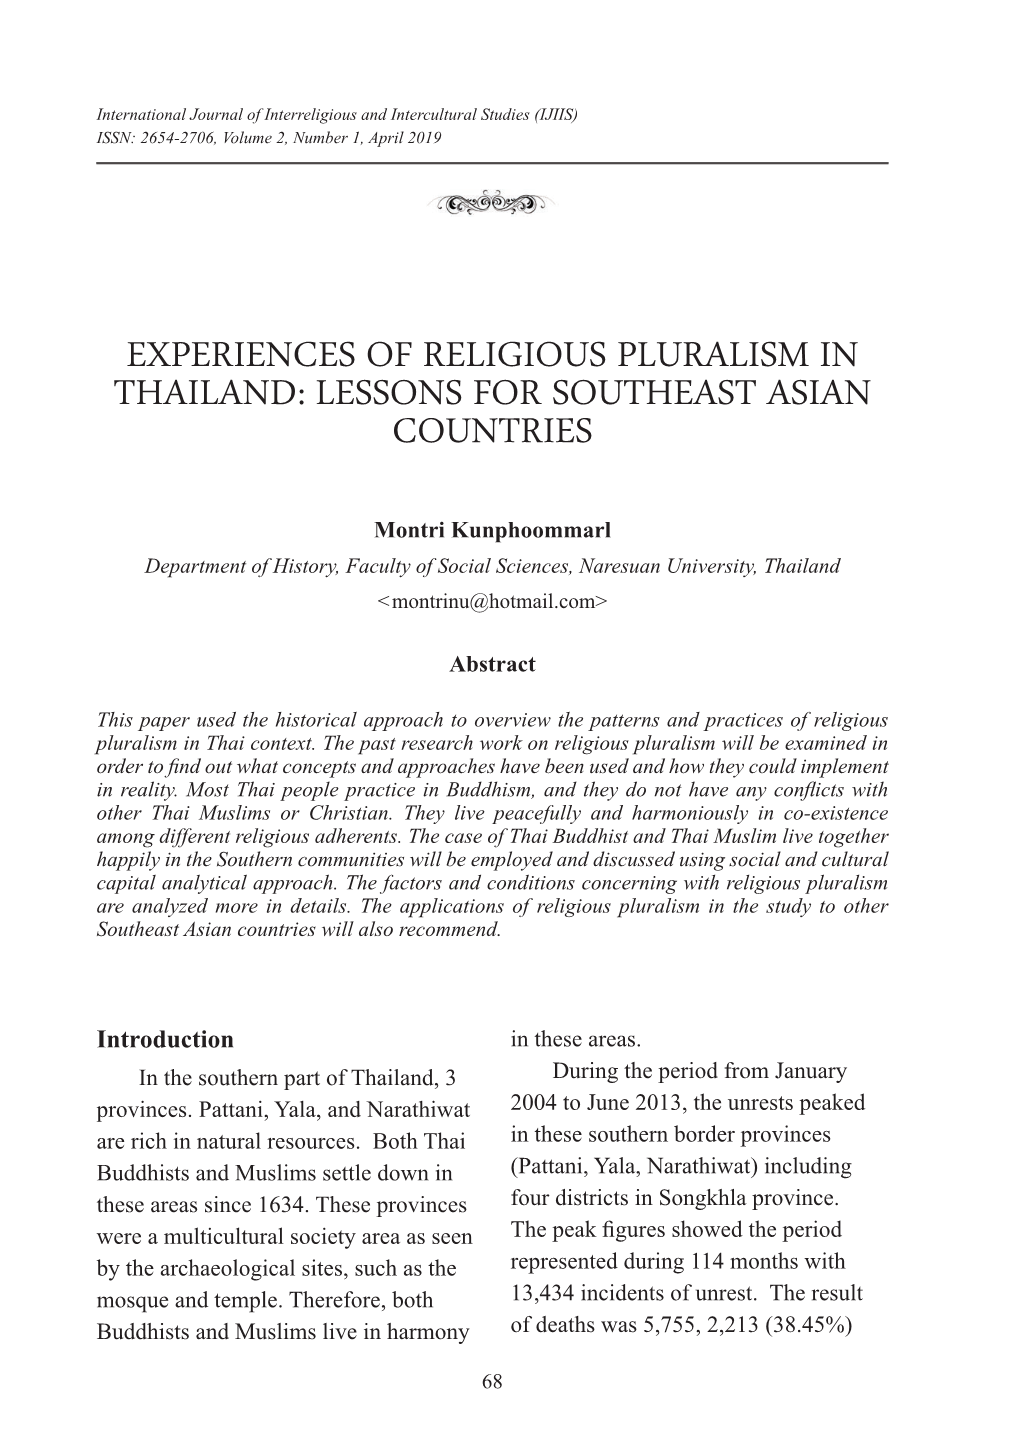 Experiences of Religious Pluralism in Thailand: Lessons for Southeast Asian Countries